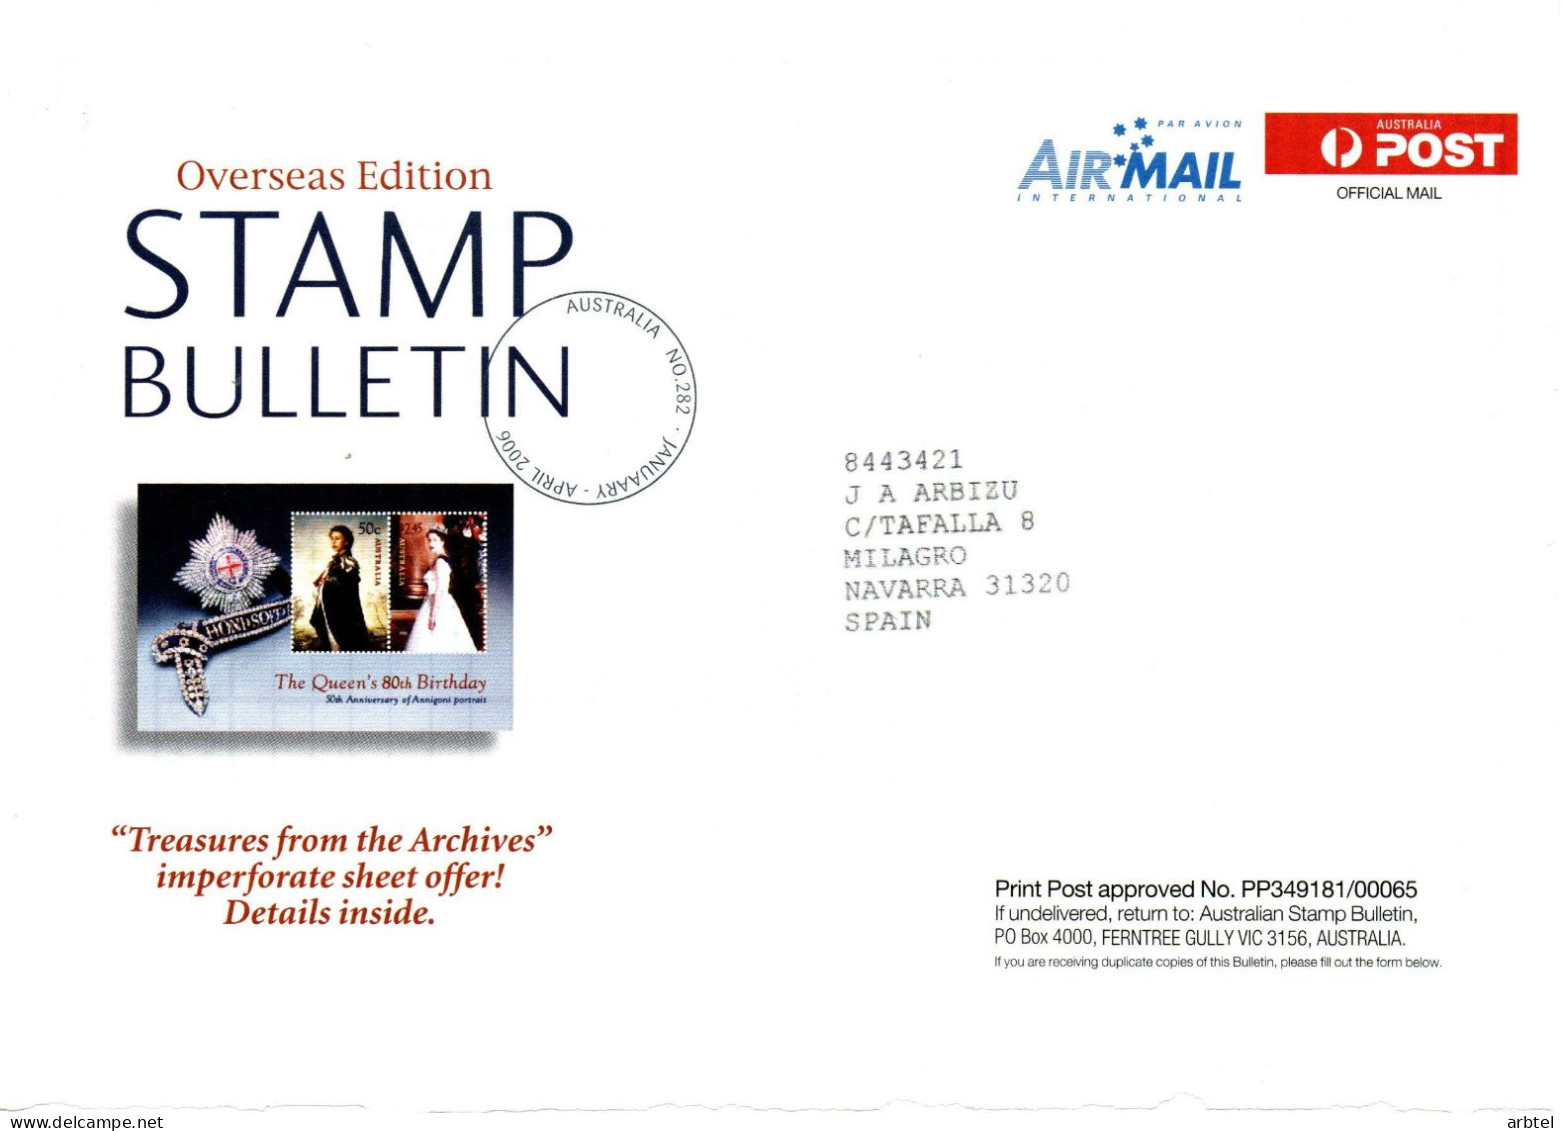 AUSTRALIA STAMP BULLETIN FRONTAL FRONT OFFICIAL MAIL QUEEN ELIZABETH - Covers & Documents